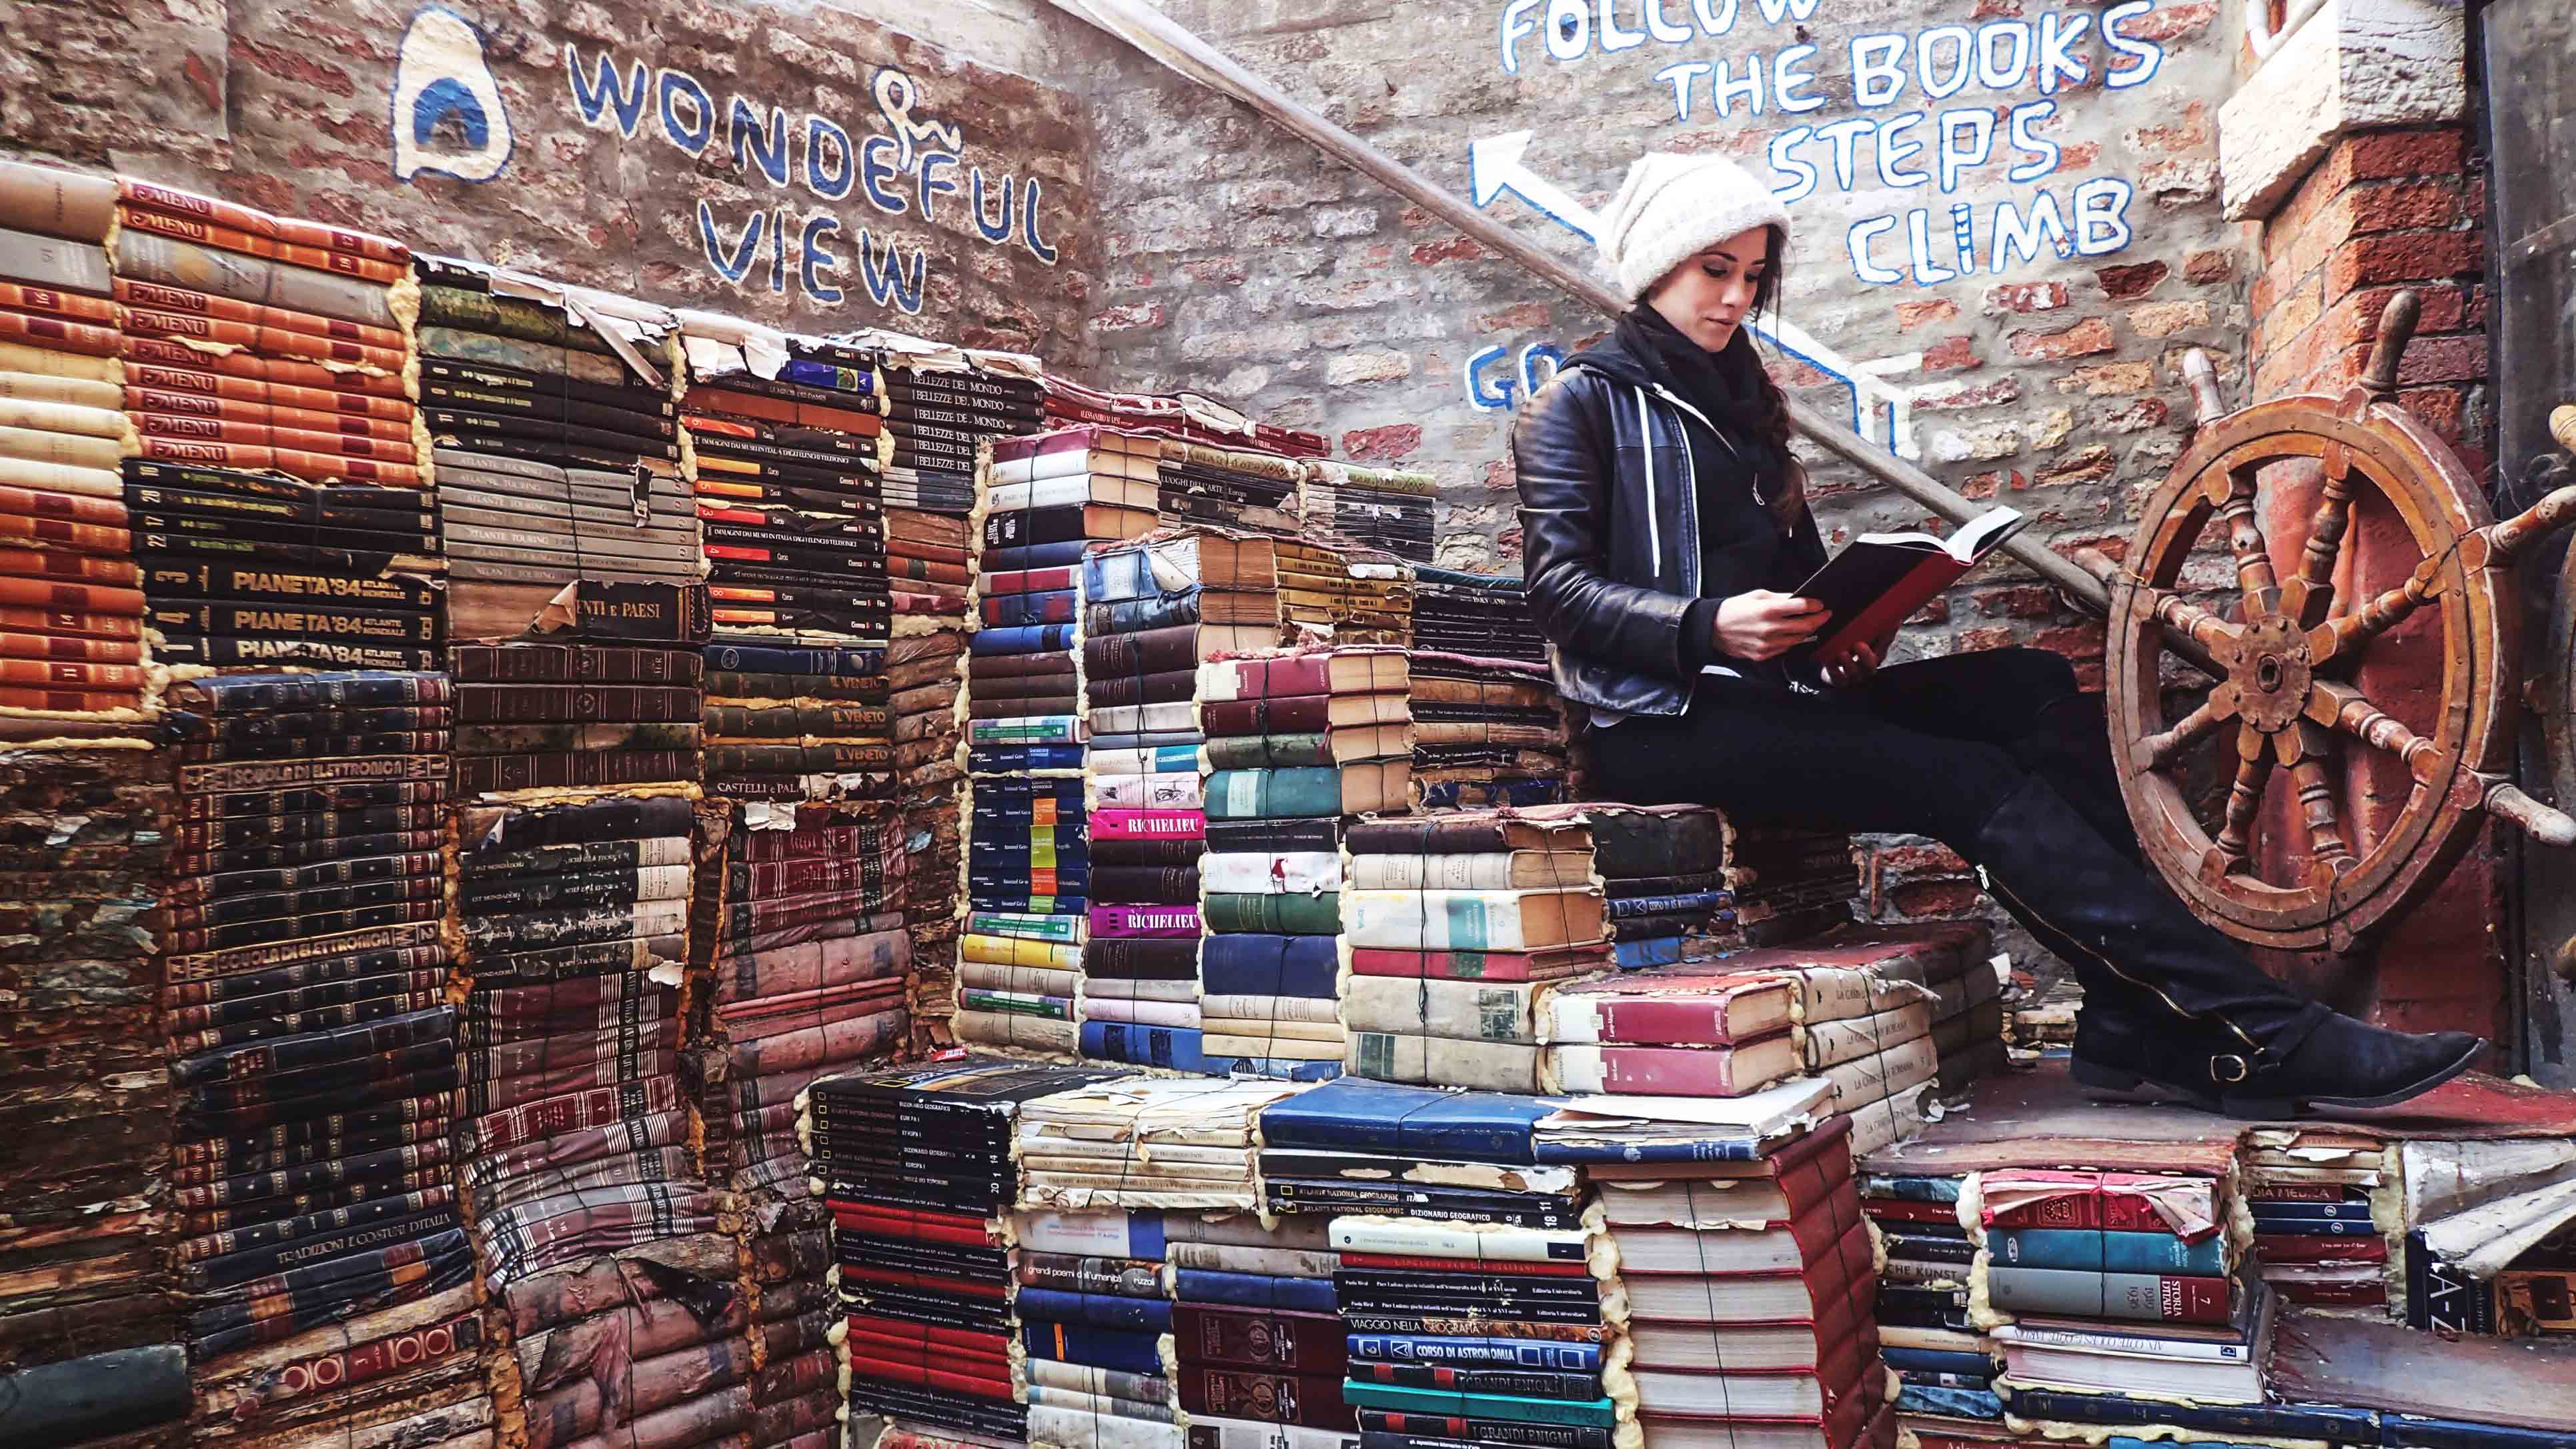 Image of a girl sitting on a staircase made of books